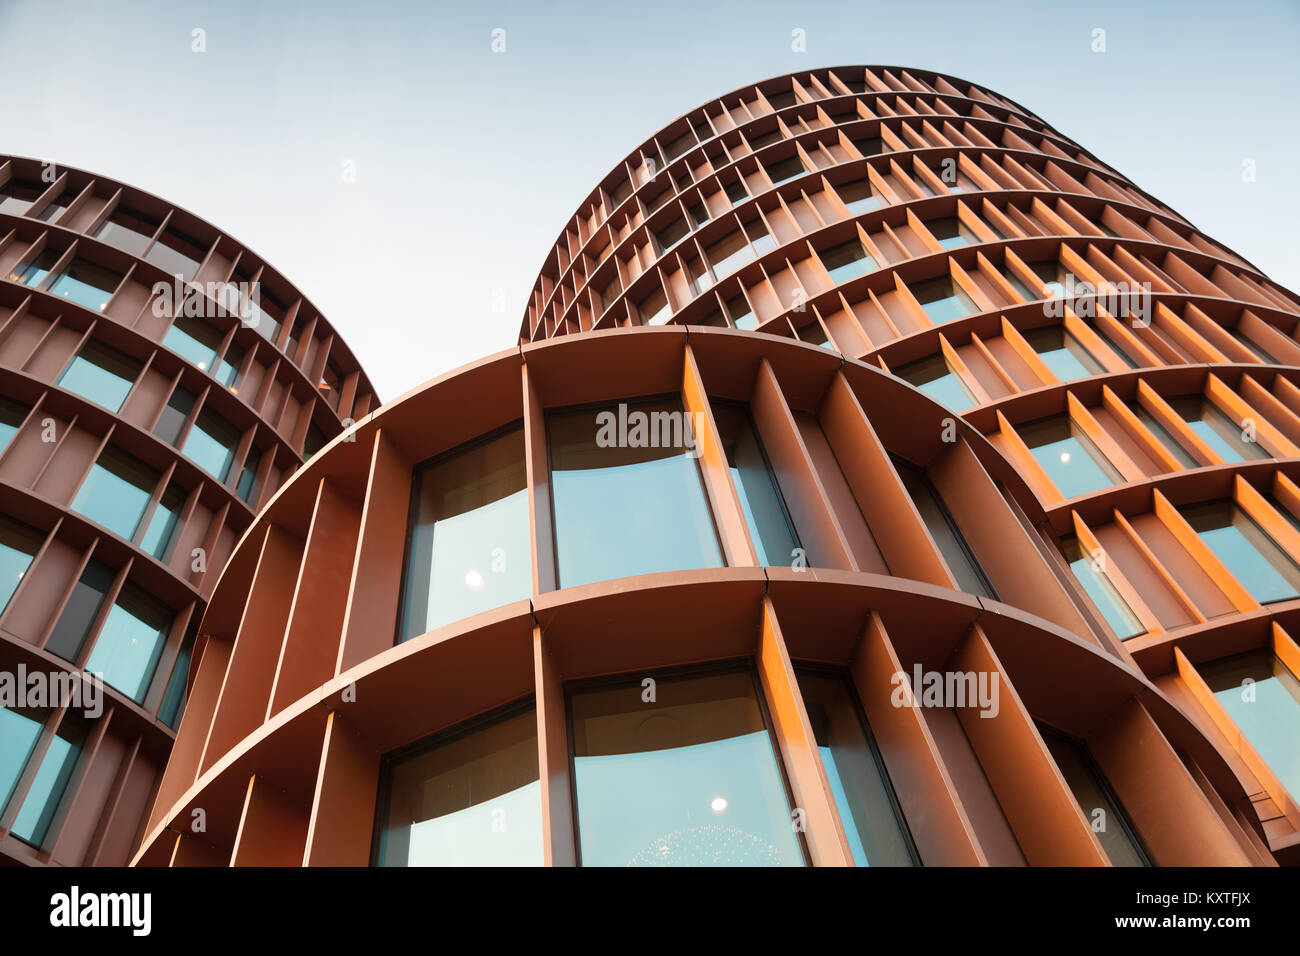 Abstract contemporary architecture background, round towers made of metal and glass Stock Photo